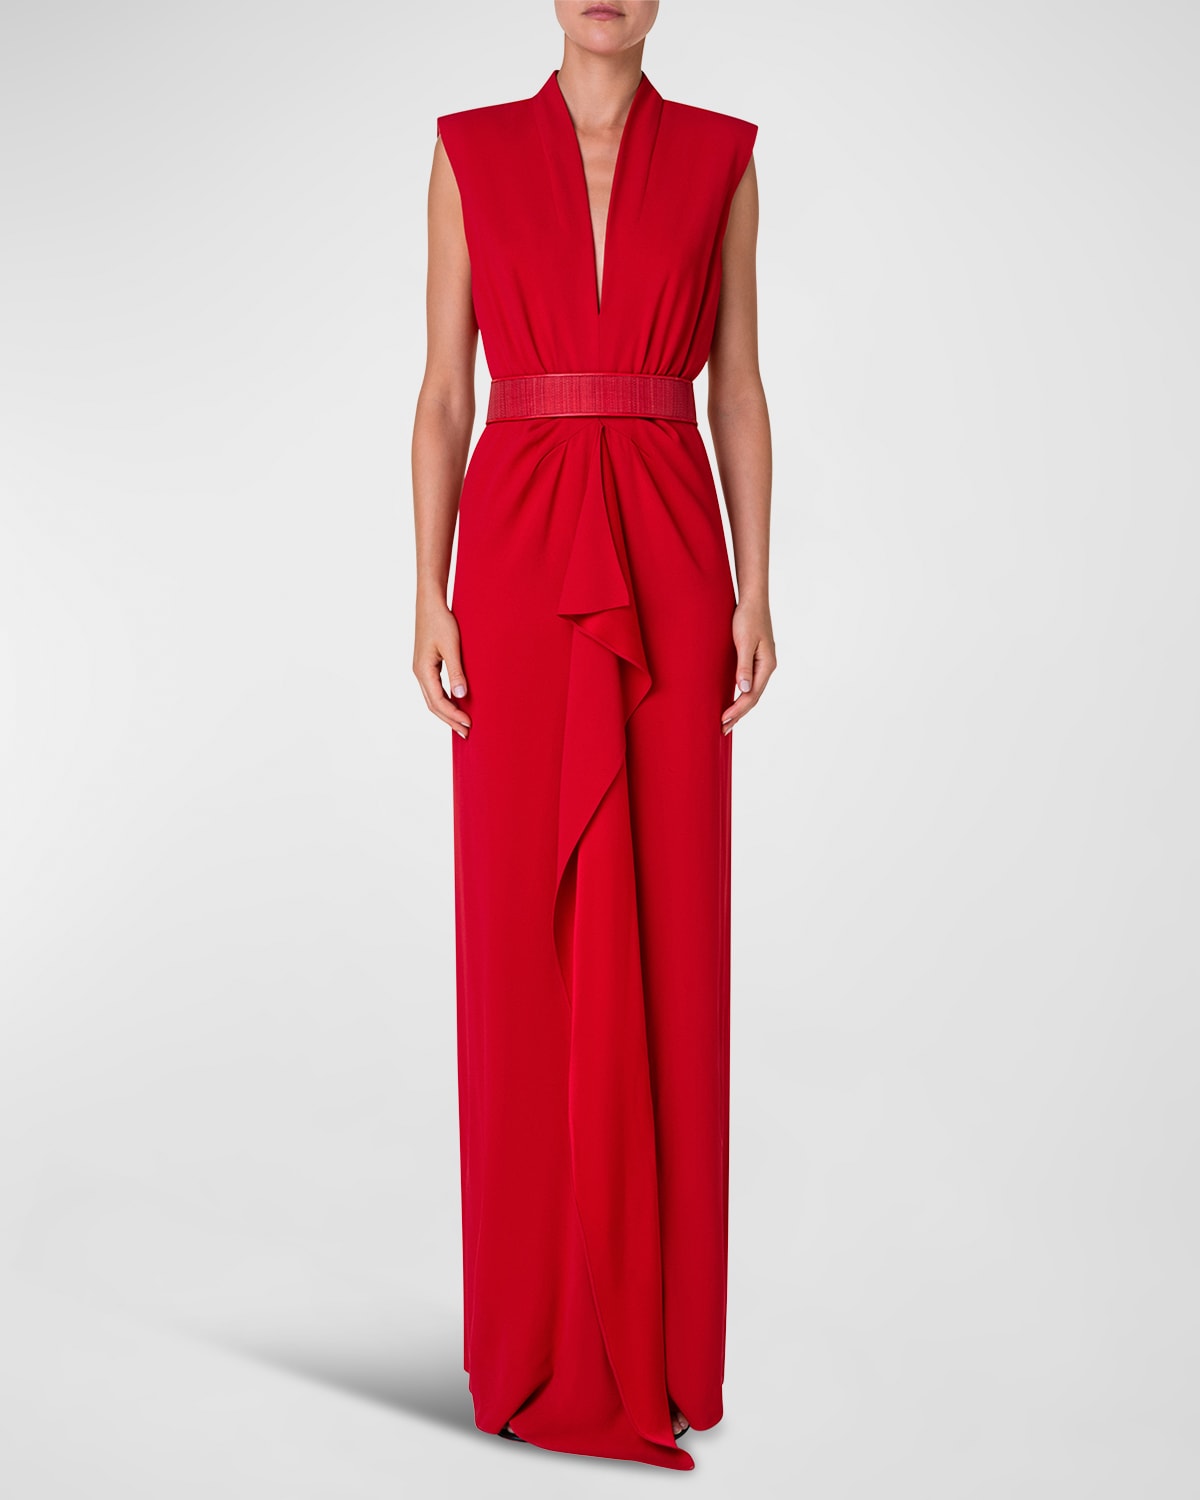 AKRIS BELTED CREPE GOWN WITH RUFFLE FRONT DETAIL